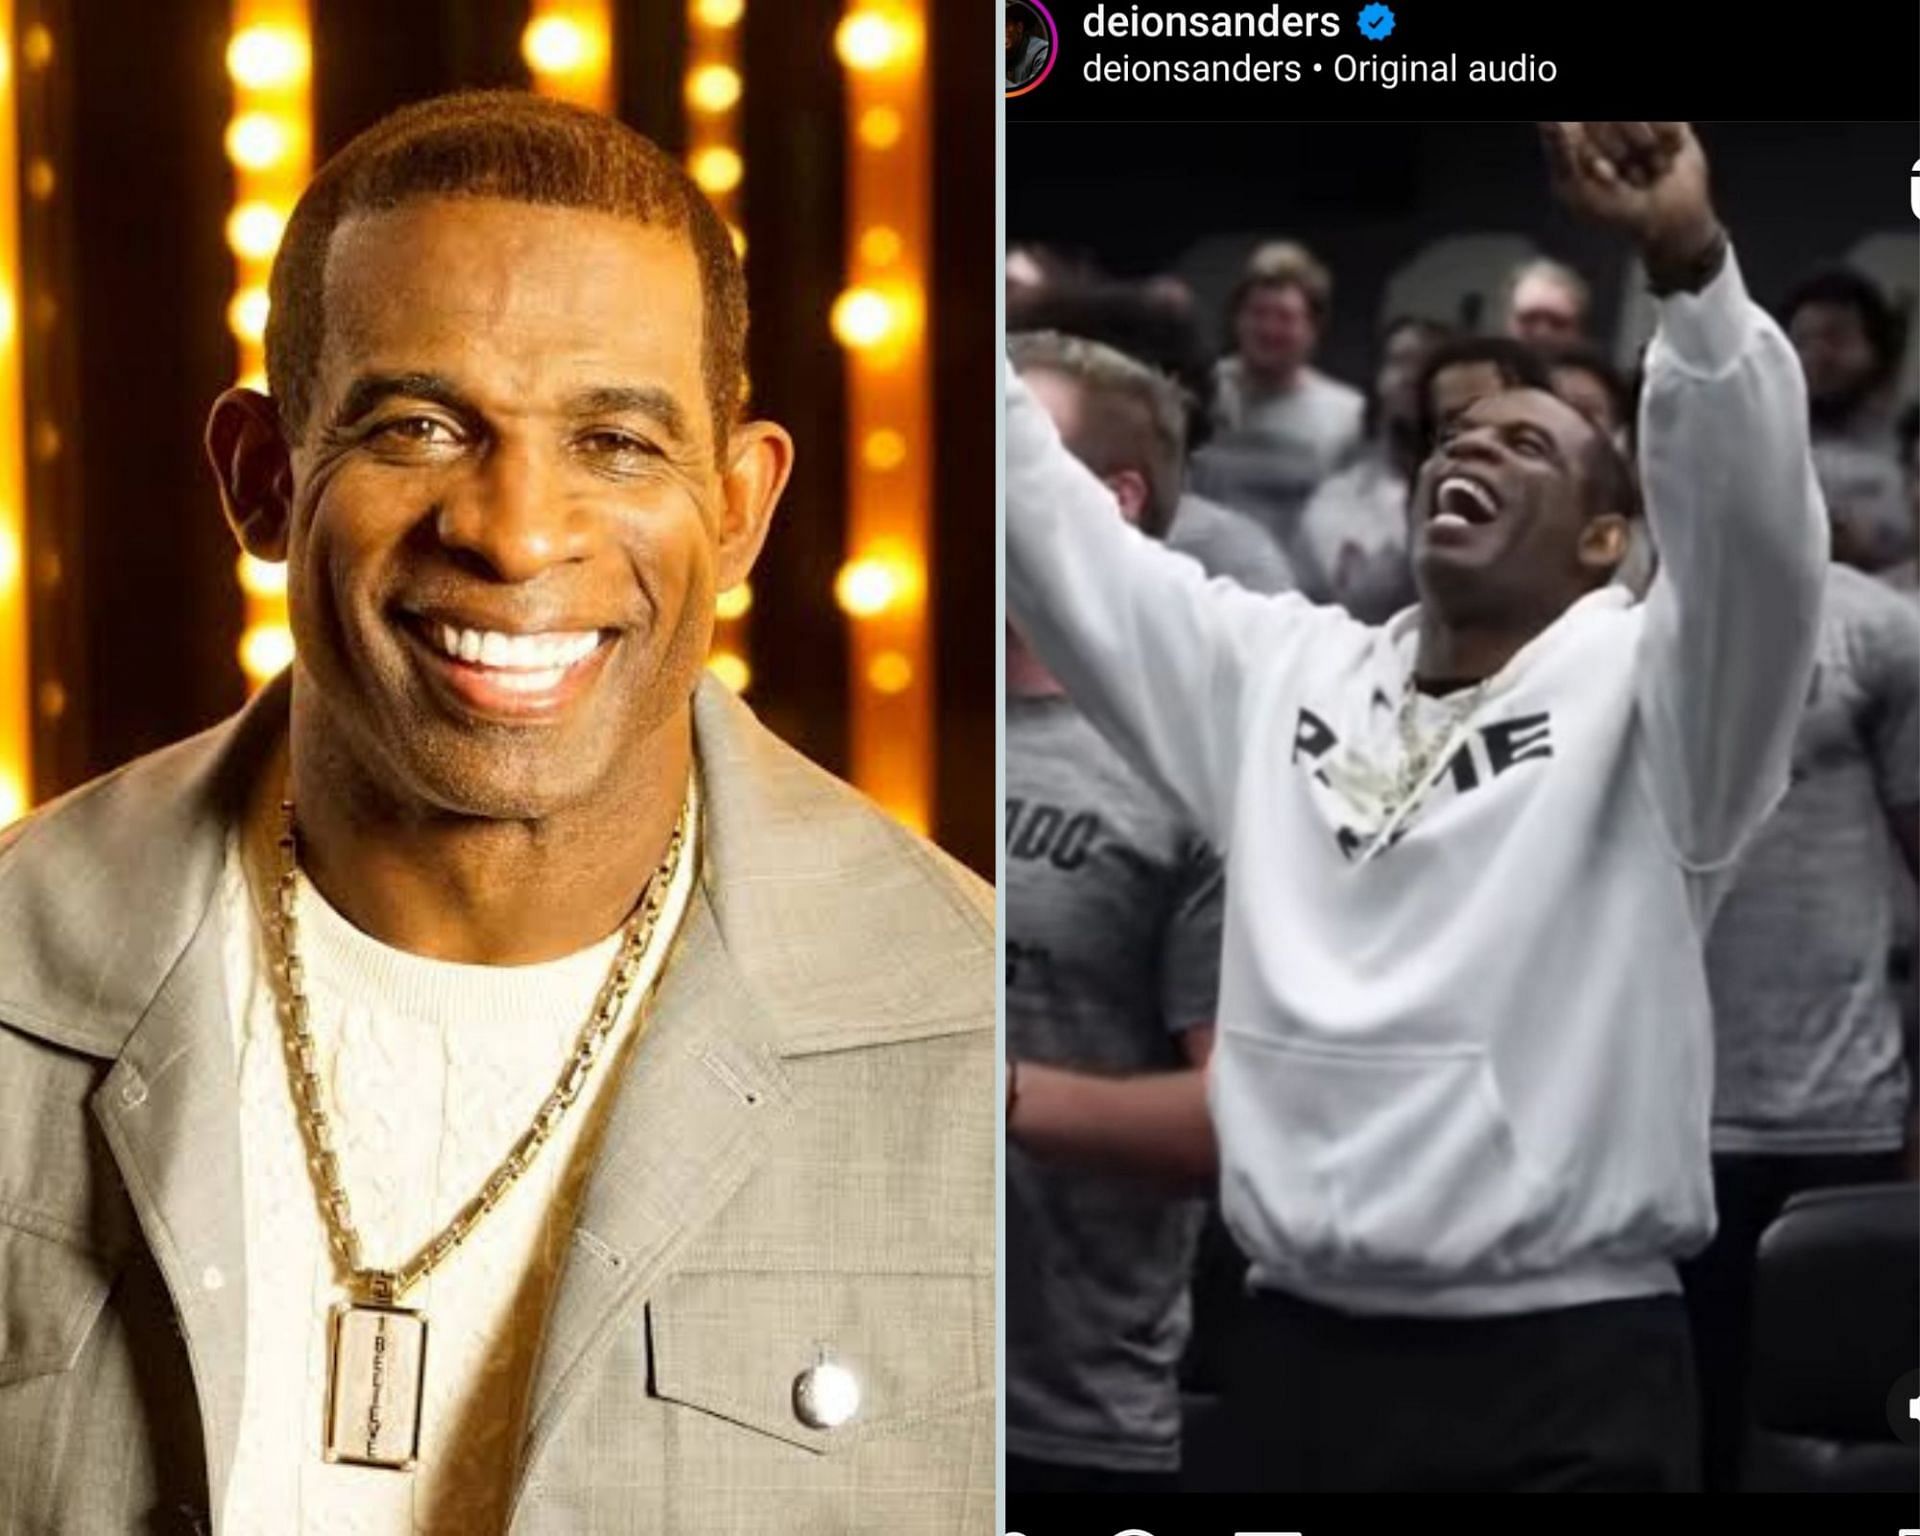 Deion Sanders celebrated his birthday with his players and staff 